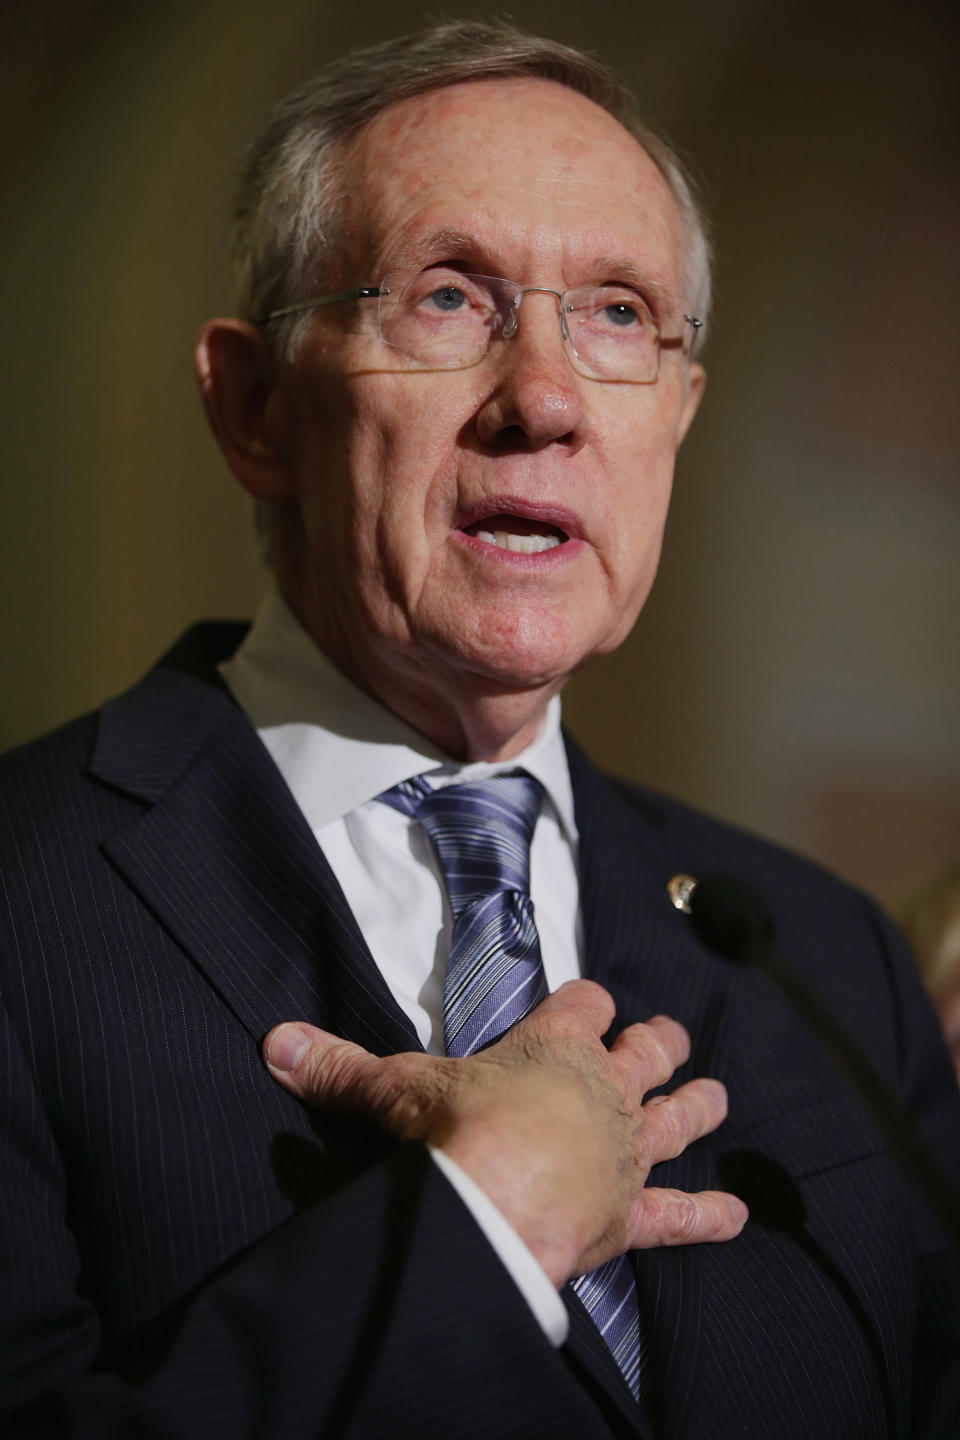 Senate Majority Leader Harry Reid (D-Nev.) thought everyone "should just calm down."  "Right now I think everyone should just calm down and understand this isn't anything that's brand new," Reid <a href="http://www.huffingtonpost.com/2013/06/06/verizon-phone-records-nsa_n_3397058.html?utm_hp_ref=politics" target="_blank">said</a>.